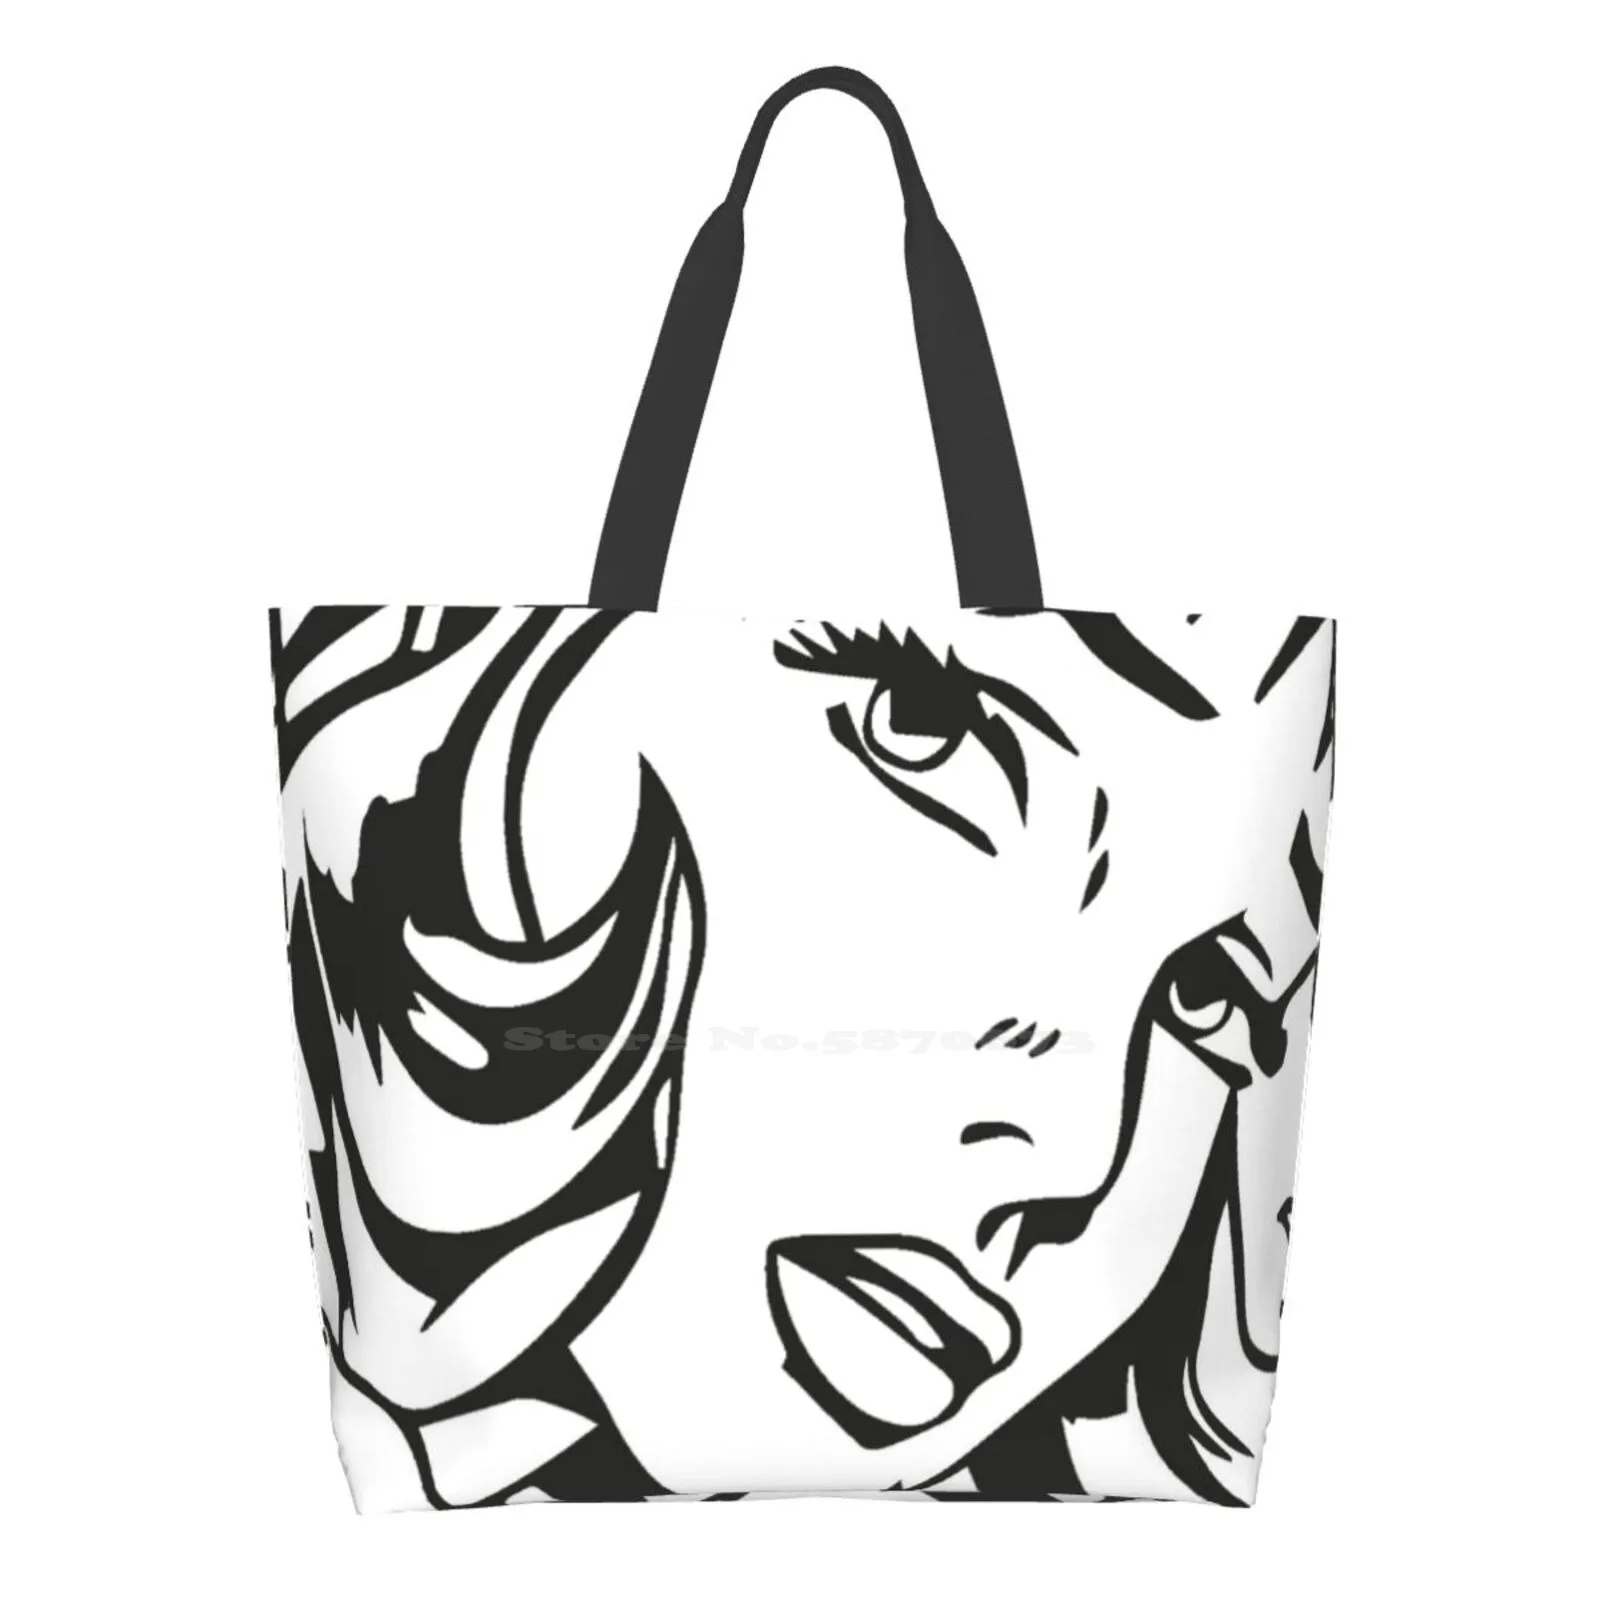 

Hair Is Reborn Of Girl Women Shopping Bag Girl Tote Large Size Funny New Hot Music Cartoon Party Night Us Band Electro